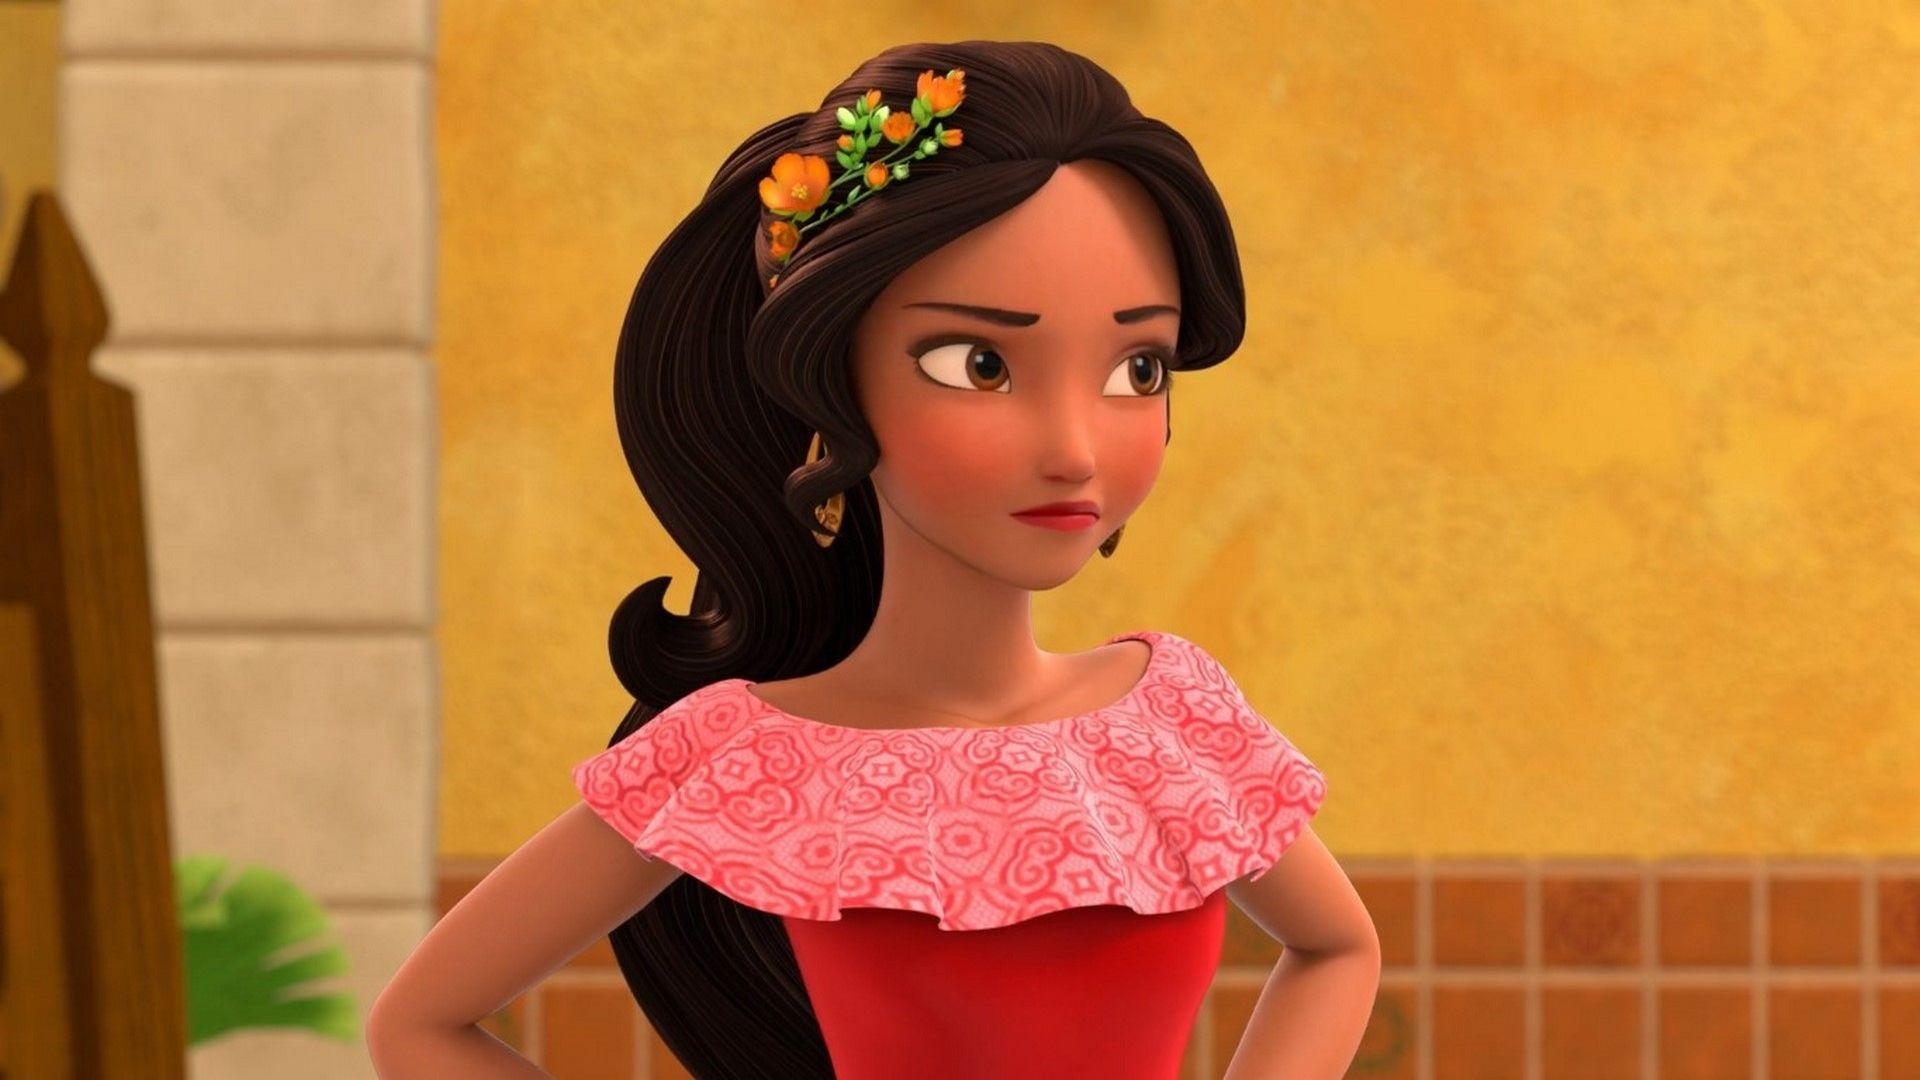 Elena of Avalor': Disney's Latest Misguided Attempt to Diversify